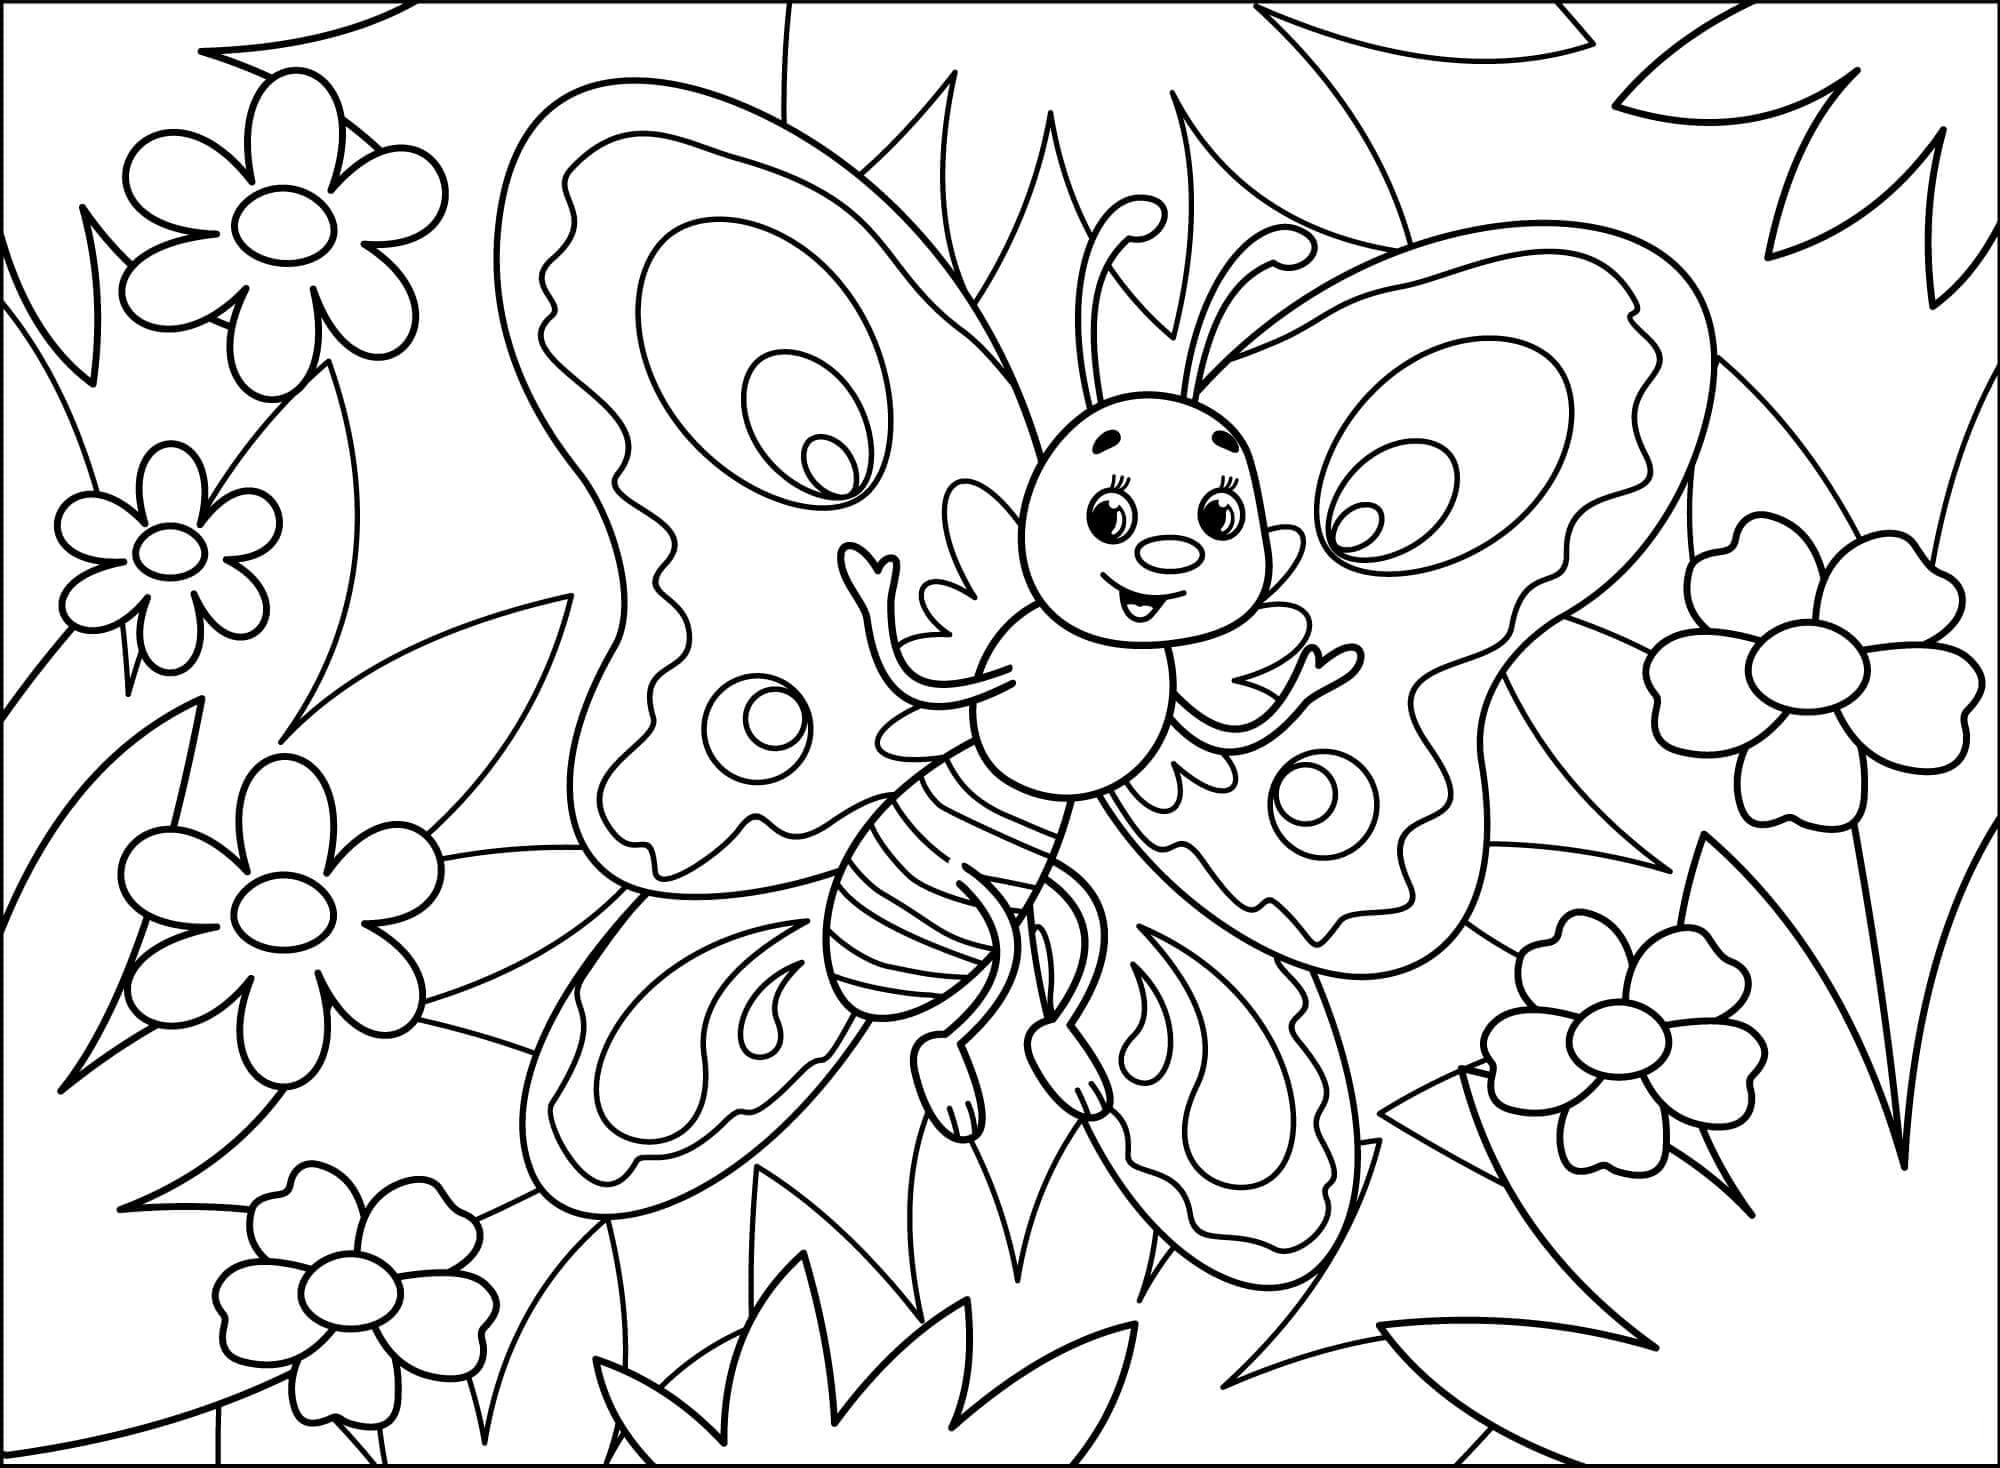 Cartoon Butterfly Coloring Page   Free Printable Coloring Pages ...